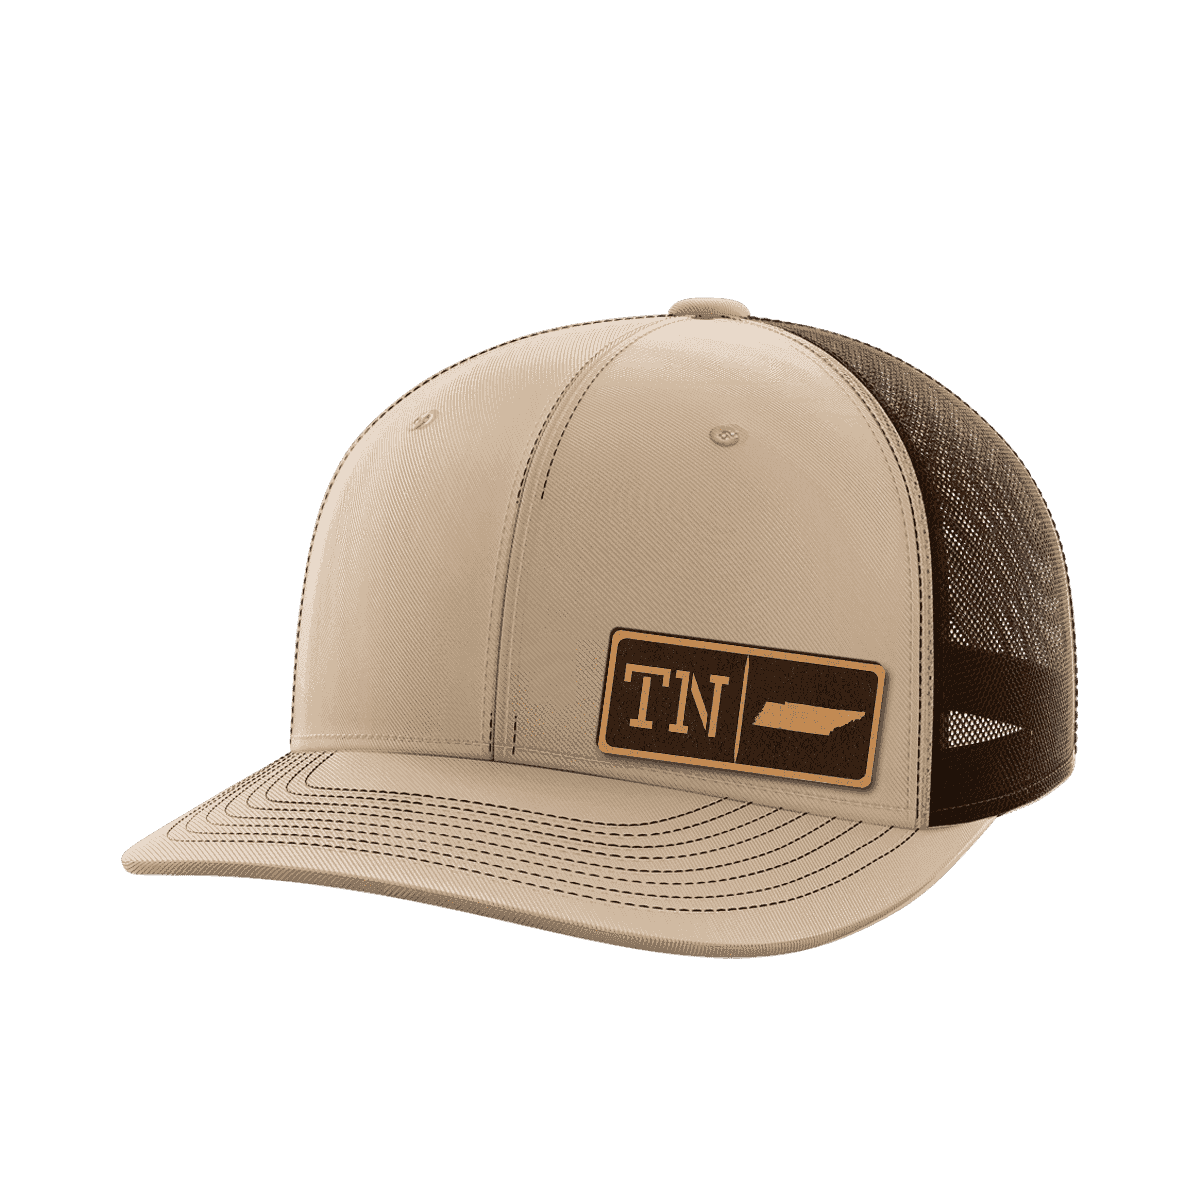 Tennessee Homegrown Hats - Greater Half